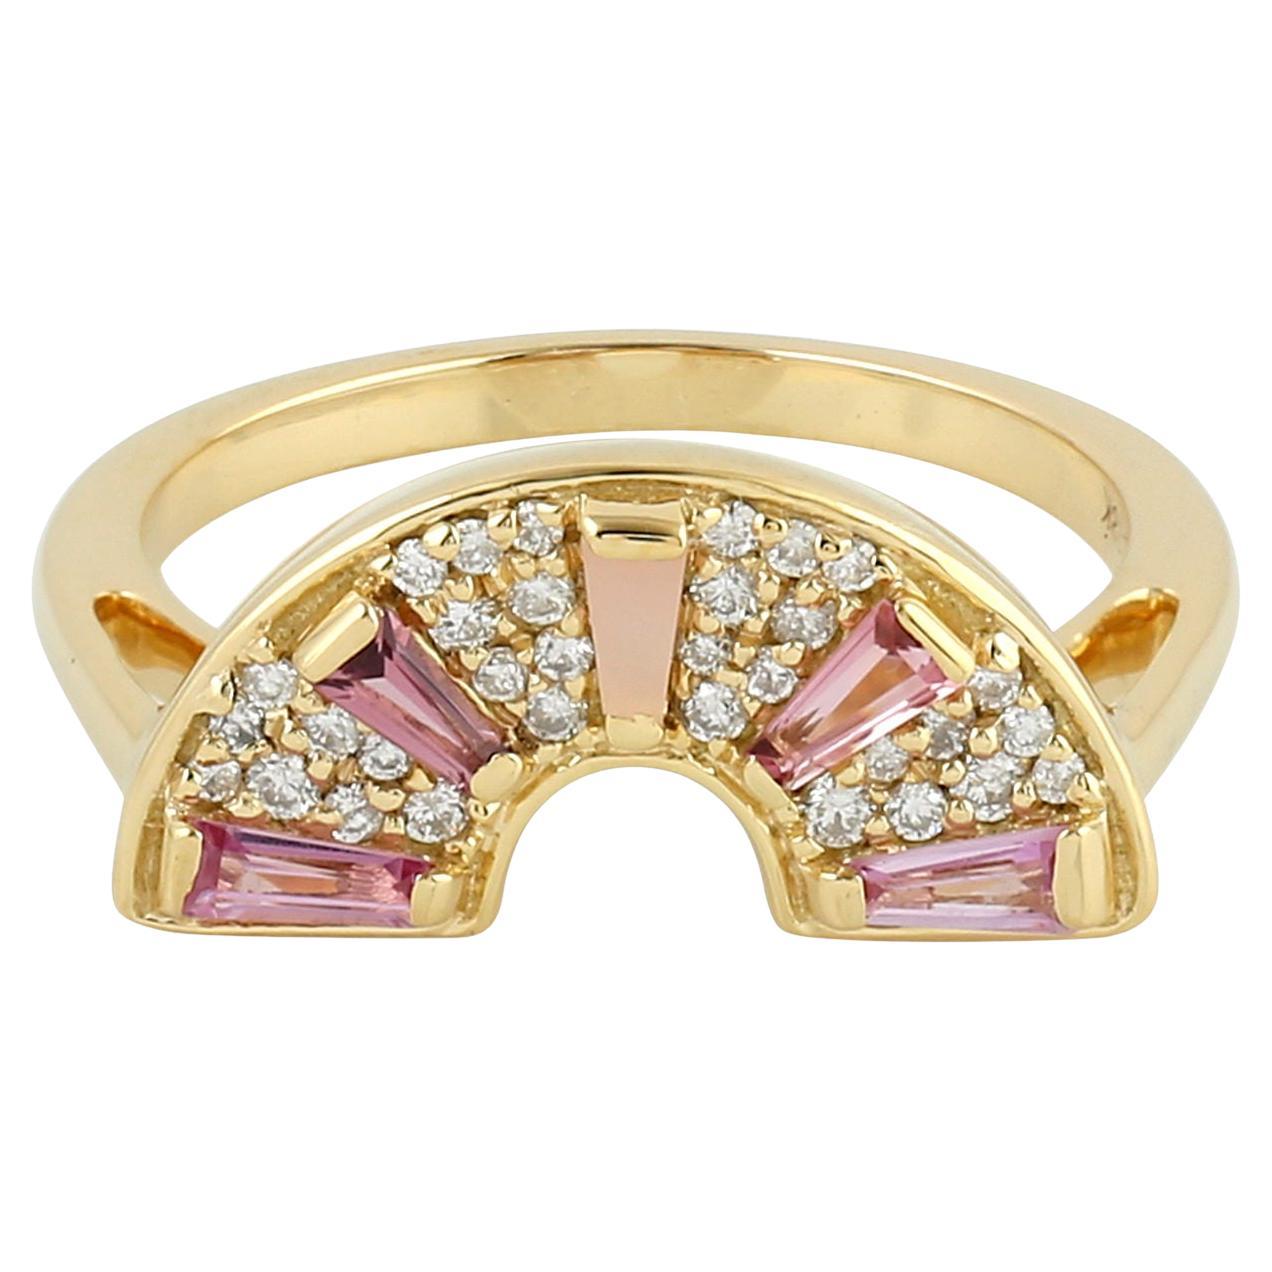 Multi Gemstone Half Ring Concept With Diamonds Made In 18k yellow Gold